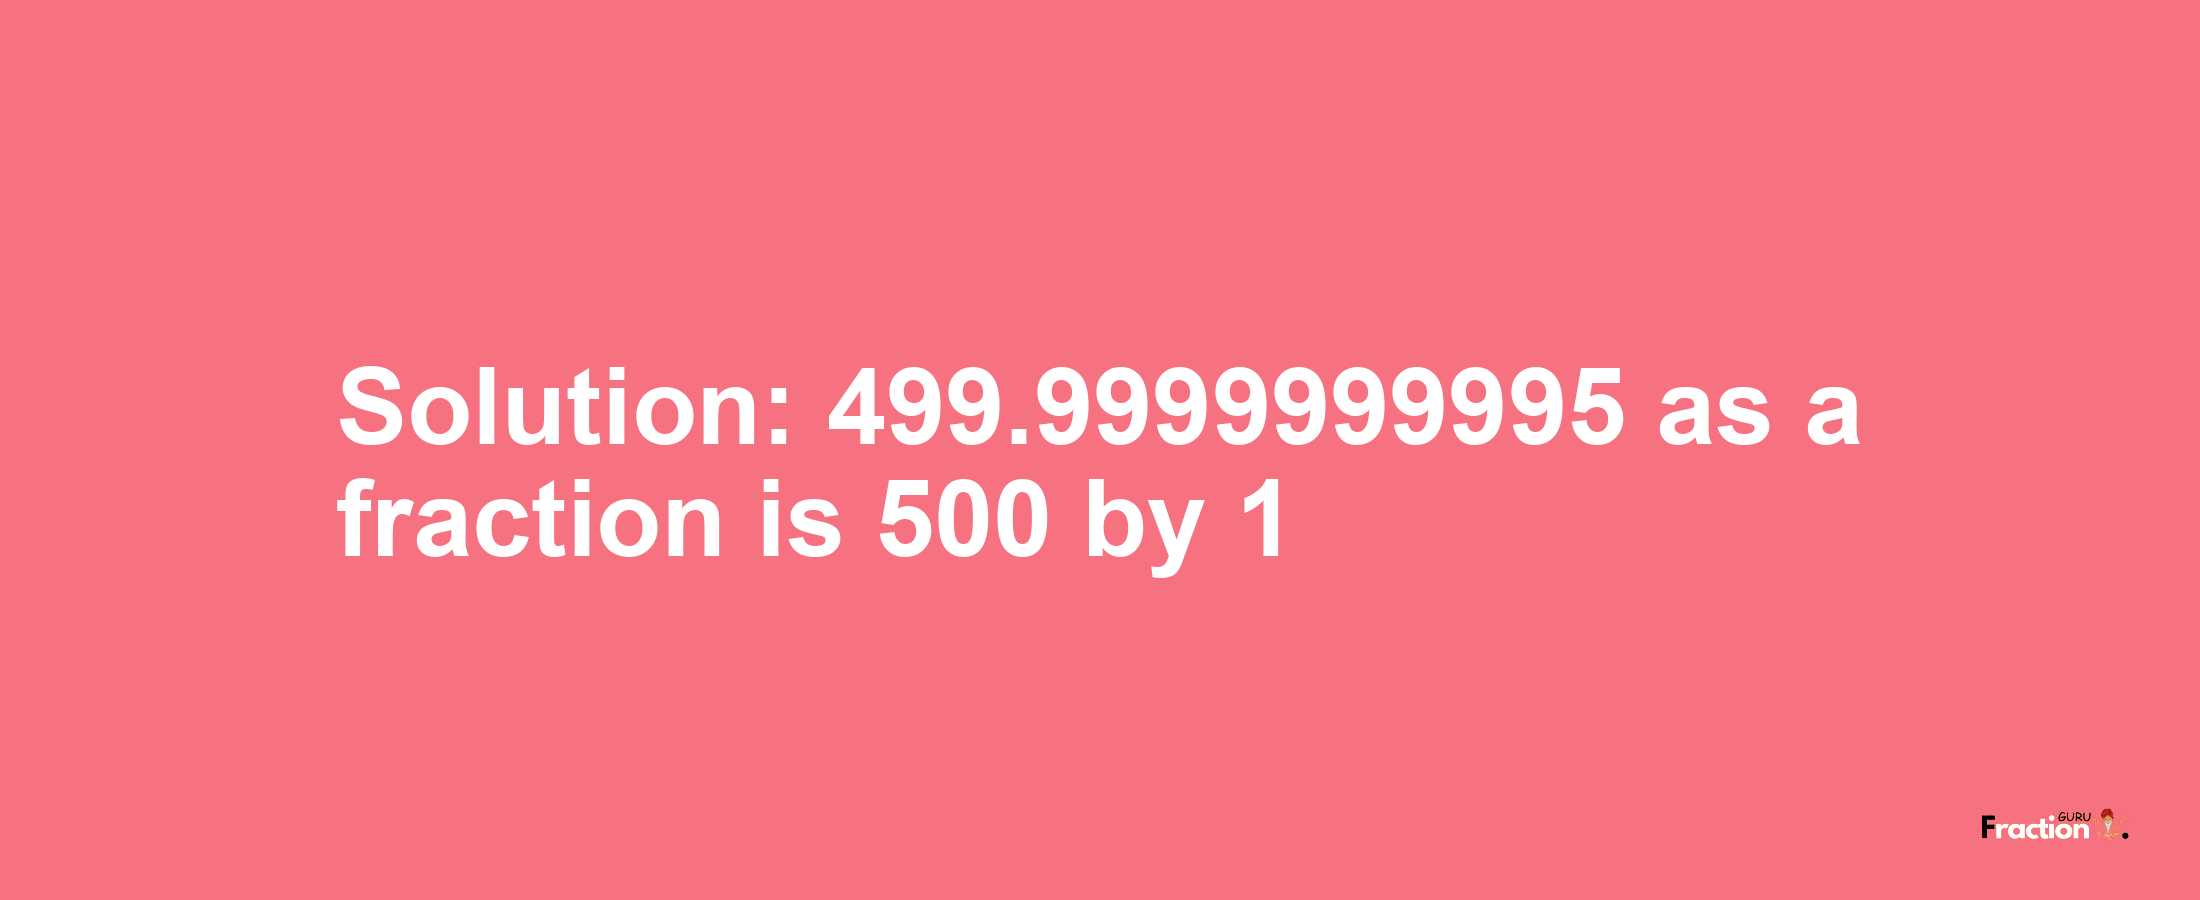 Solution:499.9999999995 as a fraction is 500/1